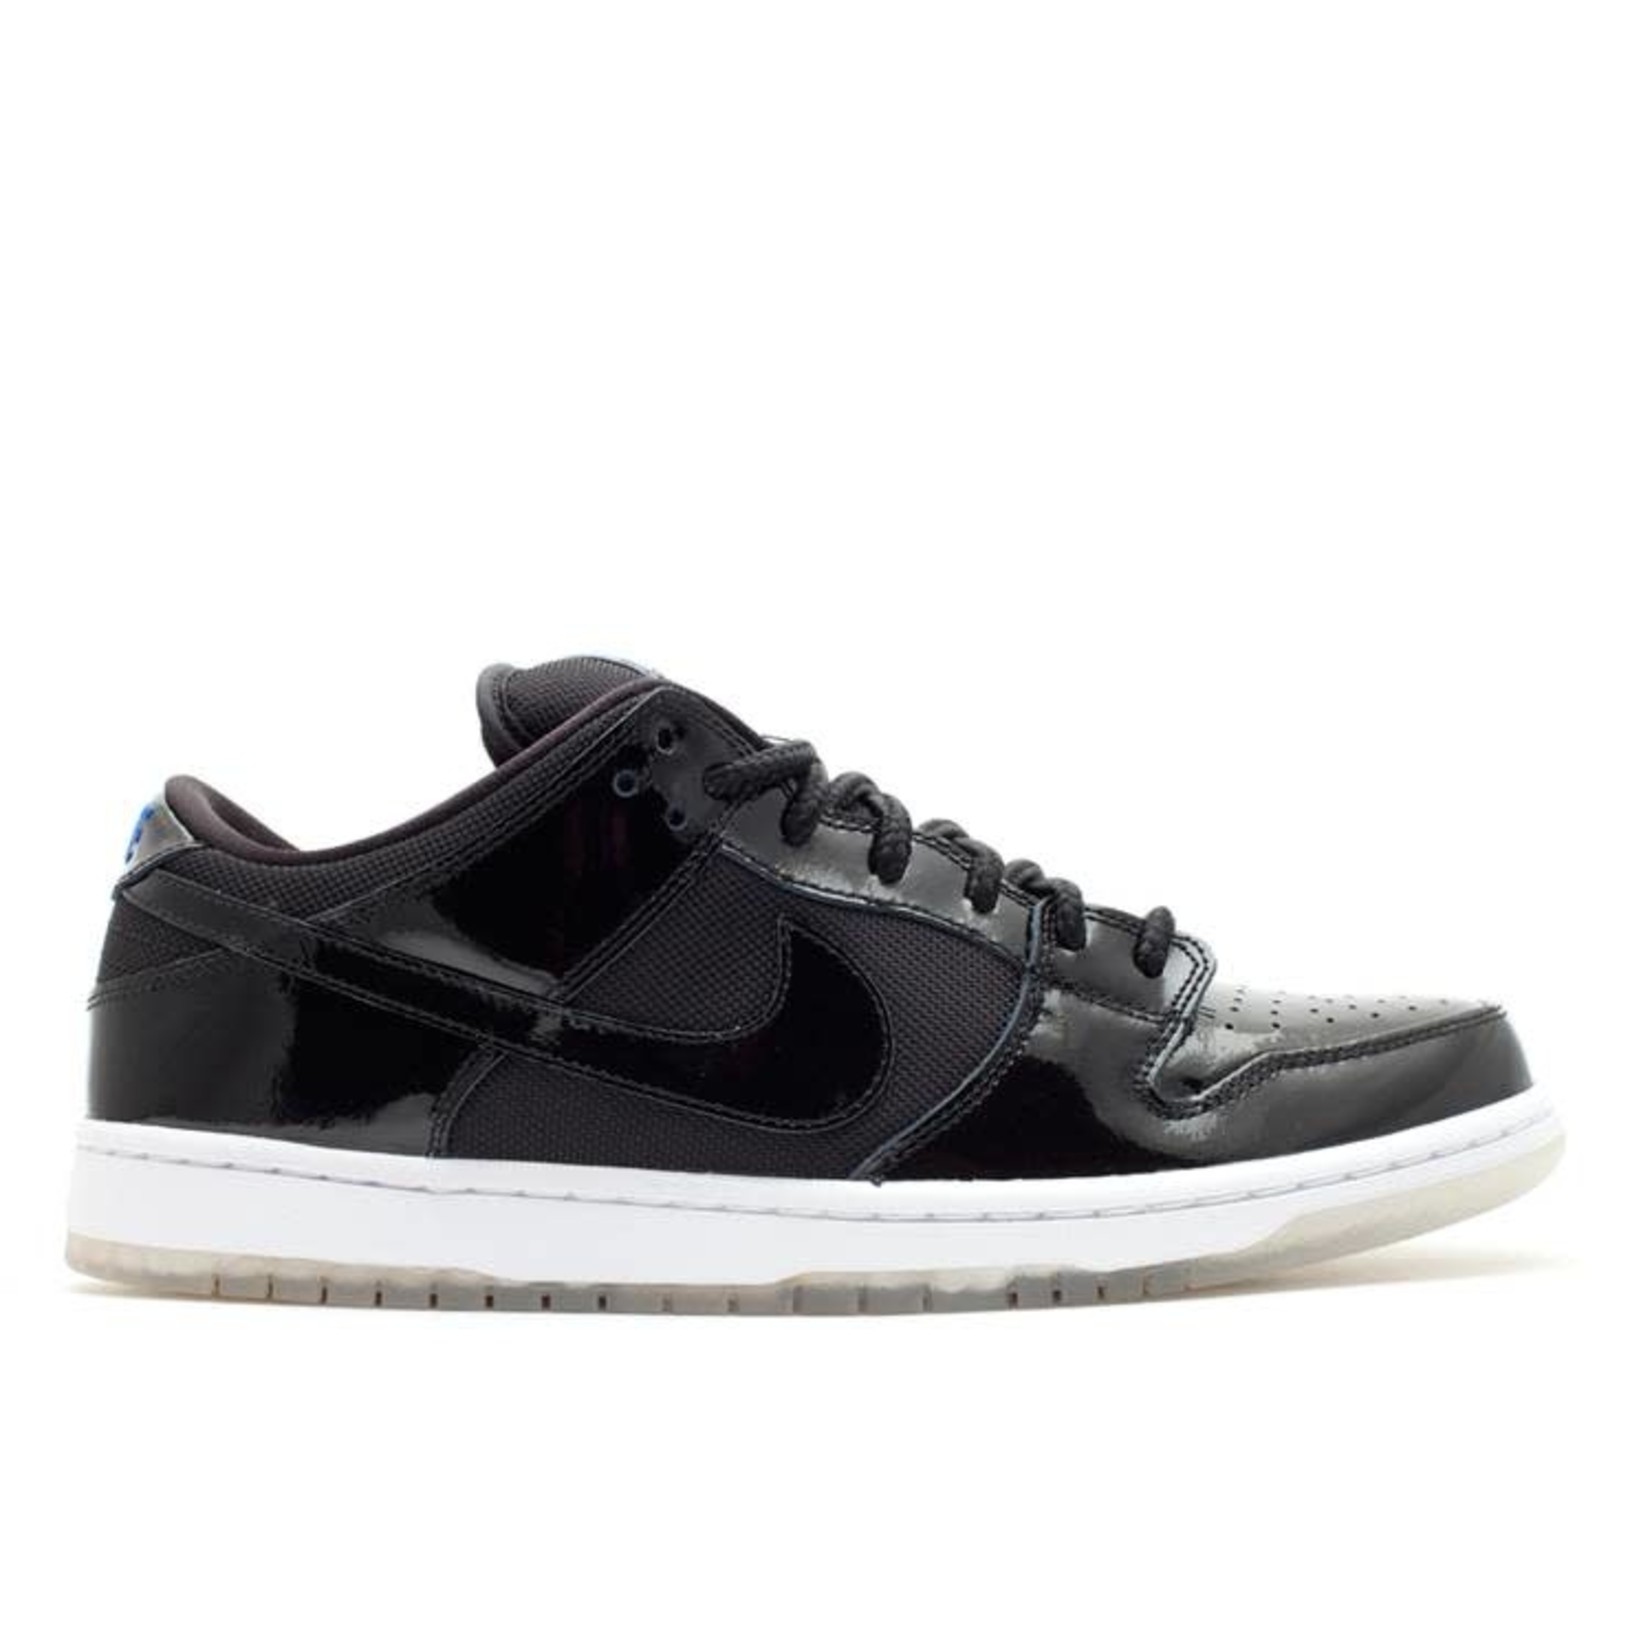 Nike Nike SB Dunk Low Space Jam Size 13, DS BRAND NEW